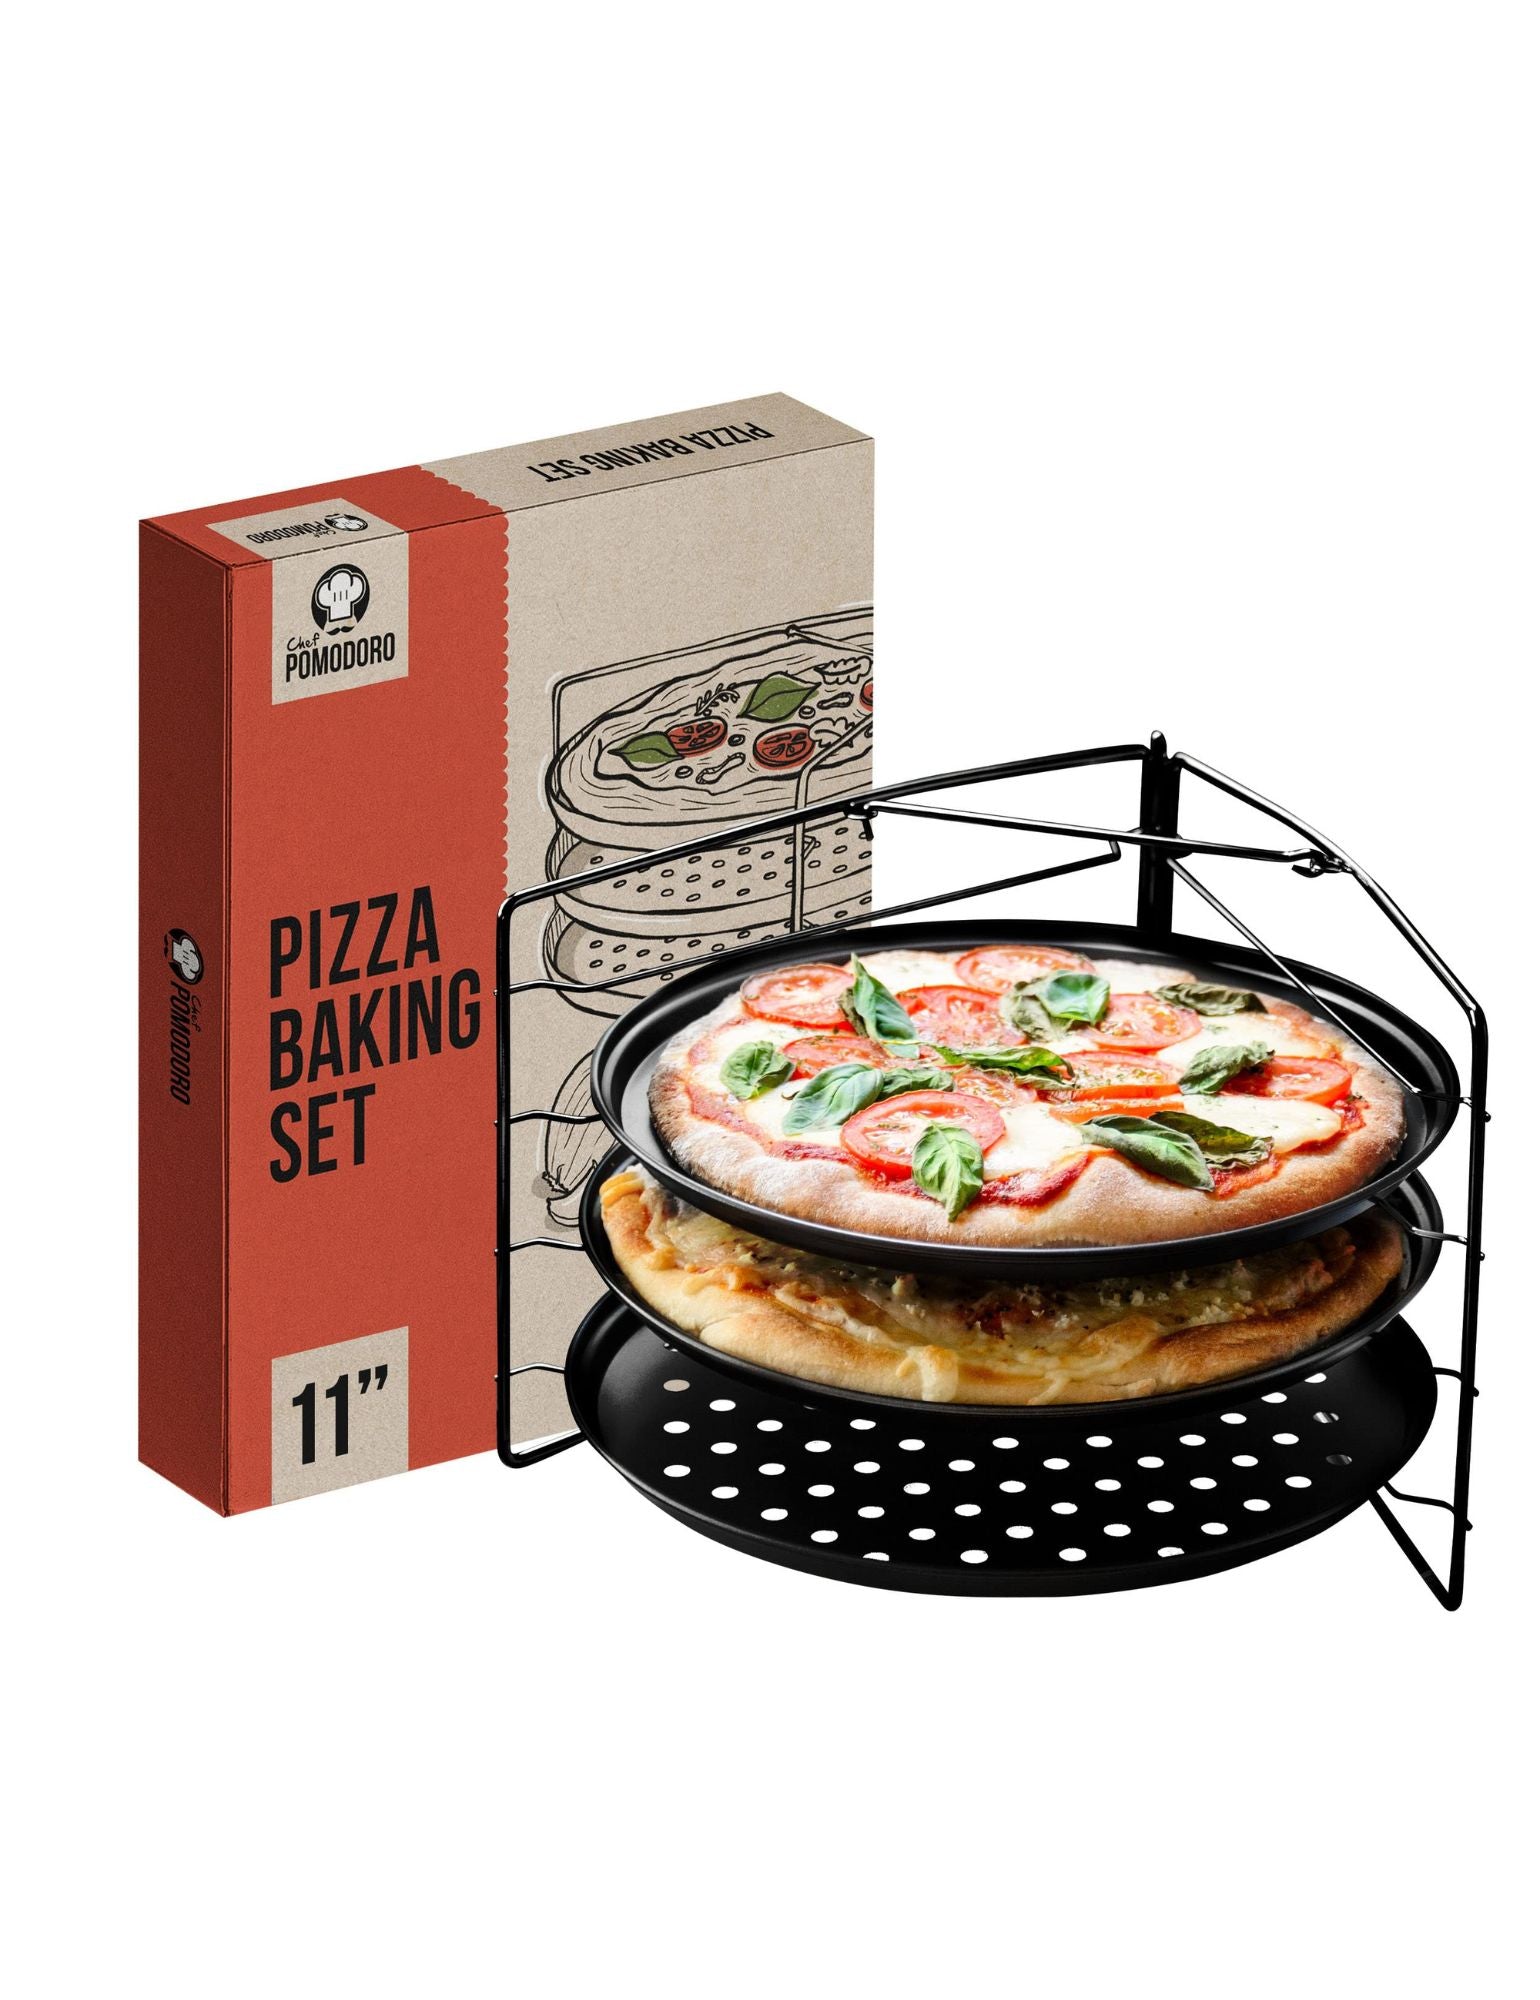 Cast Iron Pizza Pan, 12 Inch Pre-Seasoned Skillet, with Handles – Chef  Pomodoro